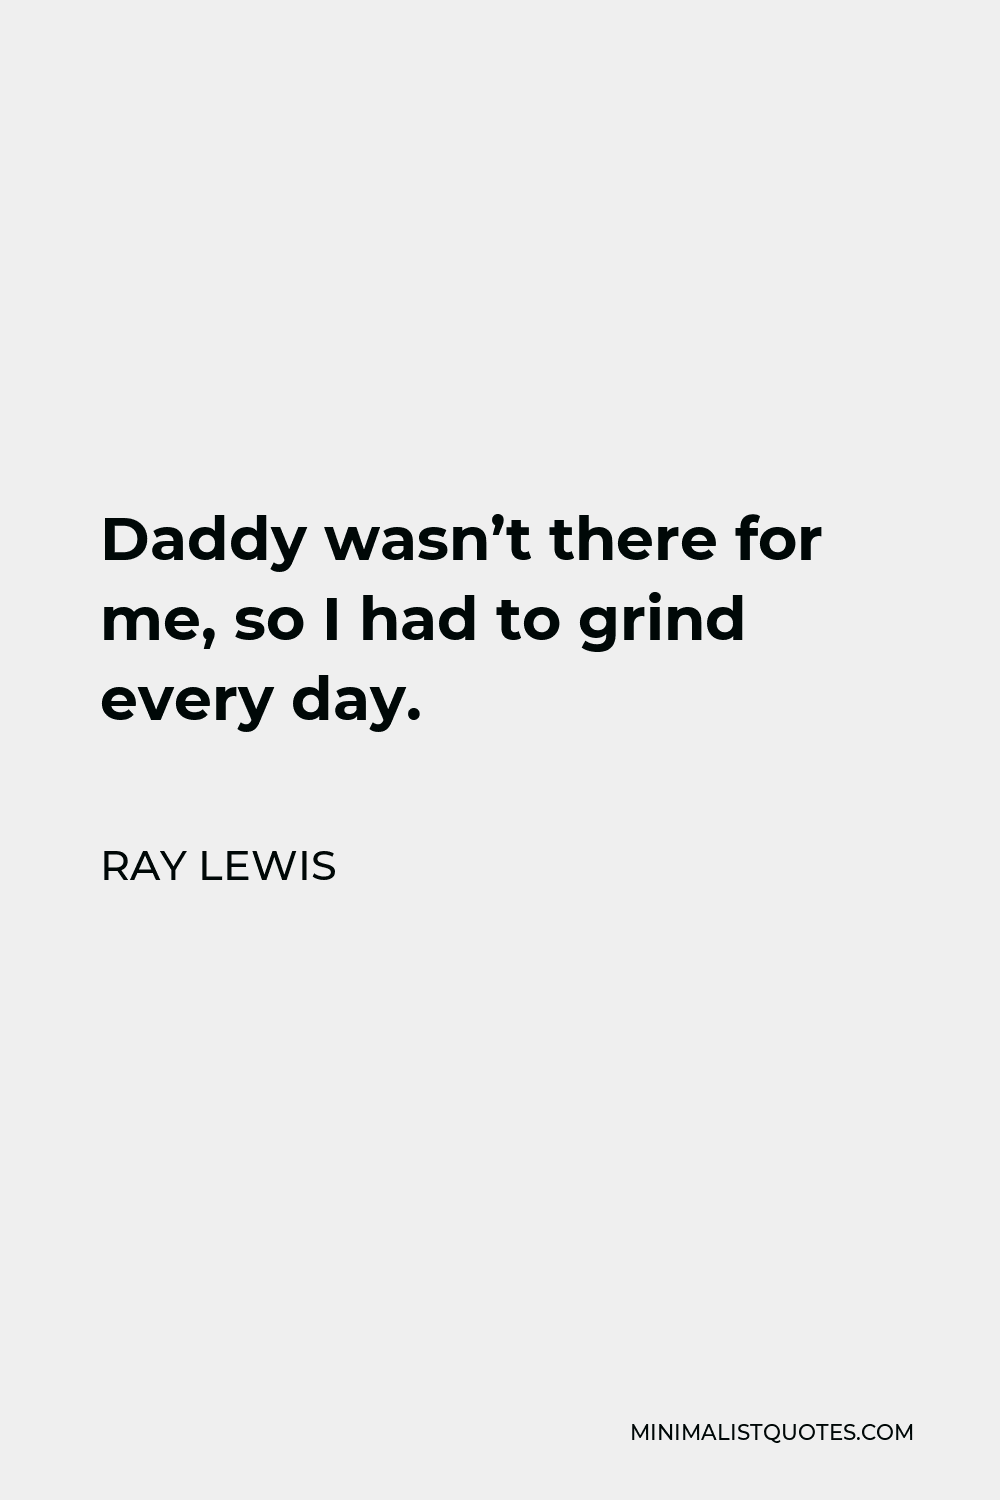 Ray Lewis Quote - Daddy wasn’t there for me, so I had to grind every day.